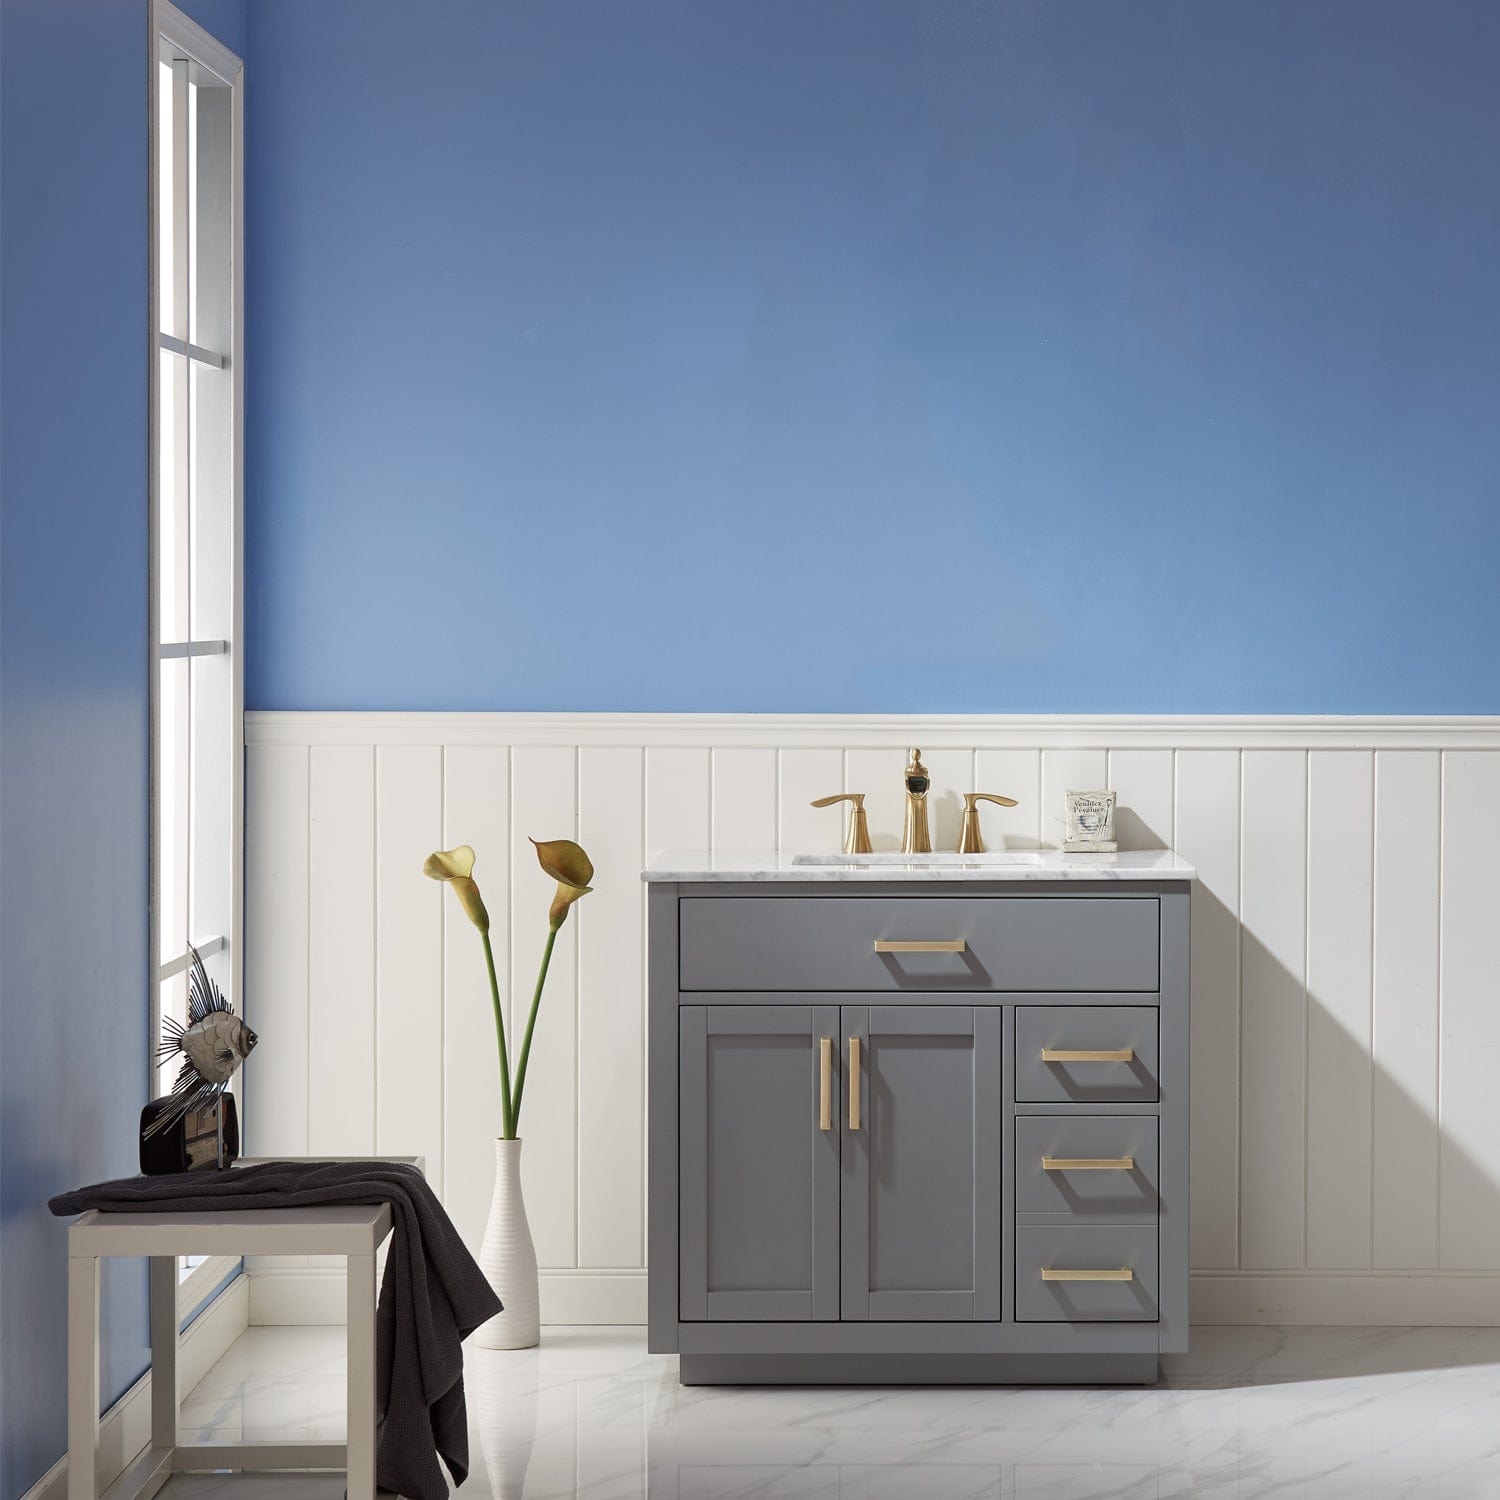 Altair Ivy 36" Single Bathroom Vanity Set in Gray and Carrara White Marble Countertop without Mirror 531036-GR-CA-NM - Molaix631112971102Vanity531036-GR-CA-NM